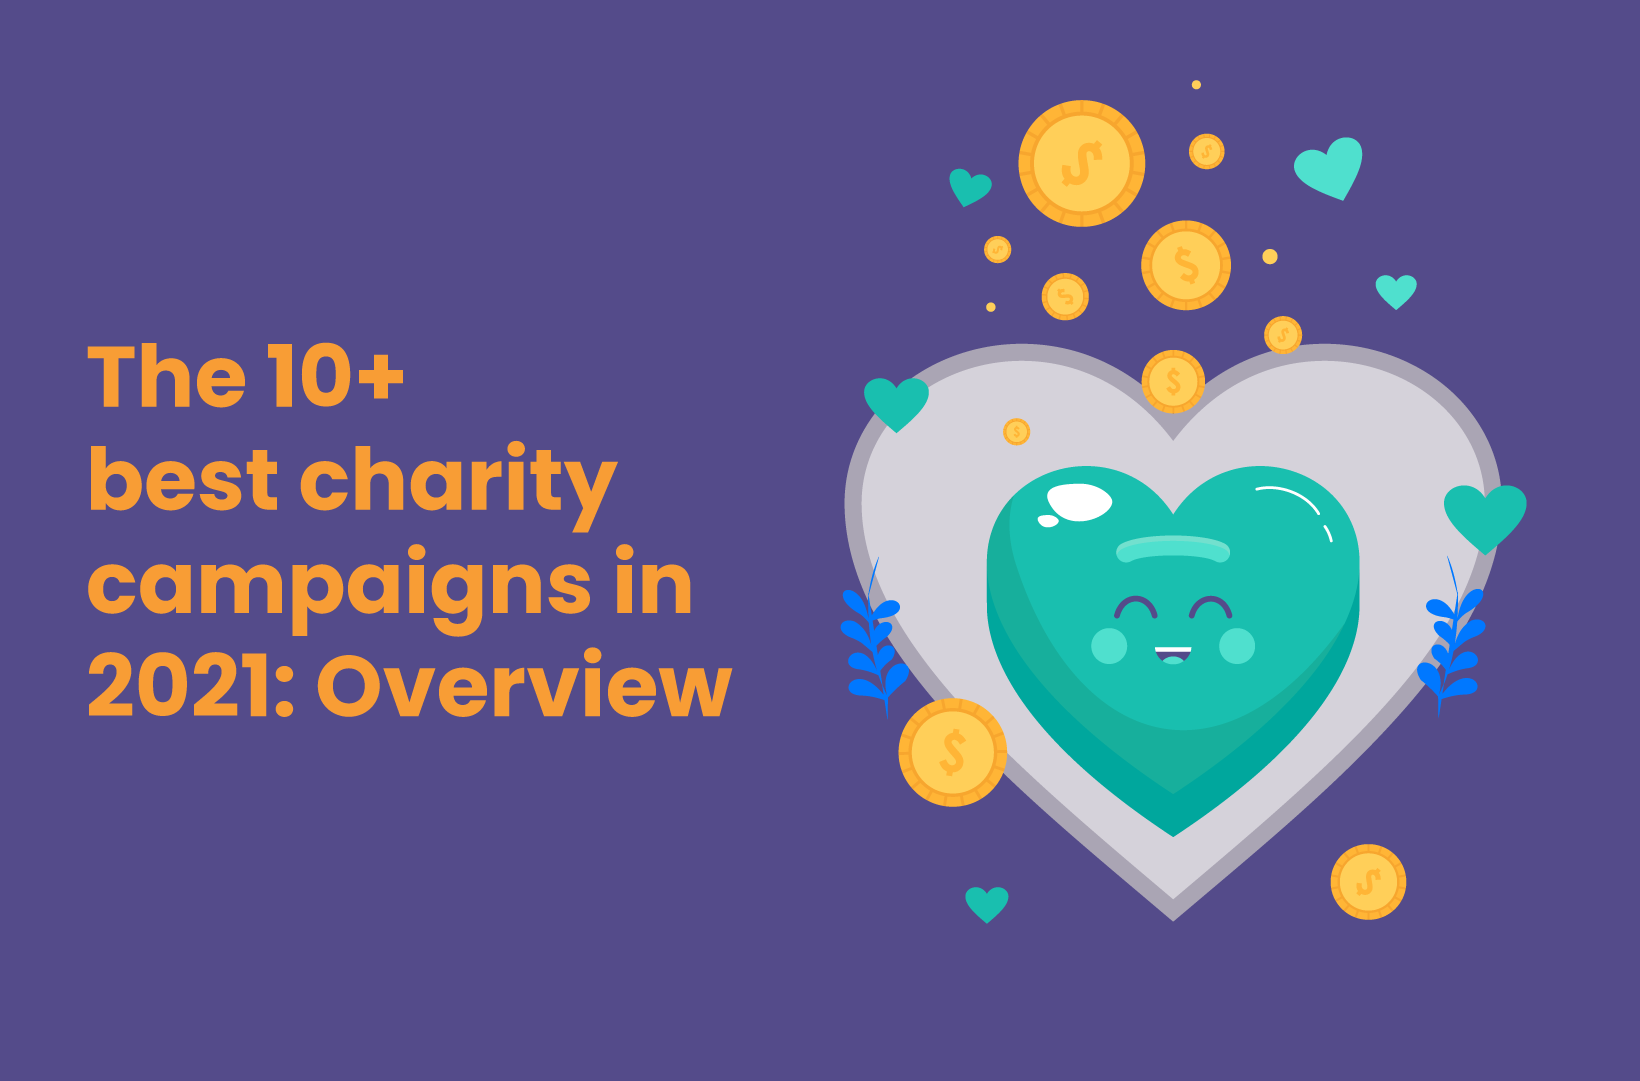 The 10+ Best Charity Campaigns in 2021+: Overview